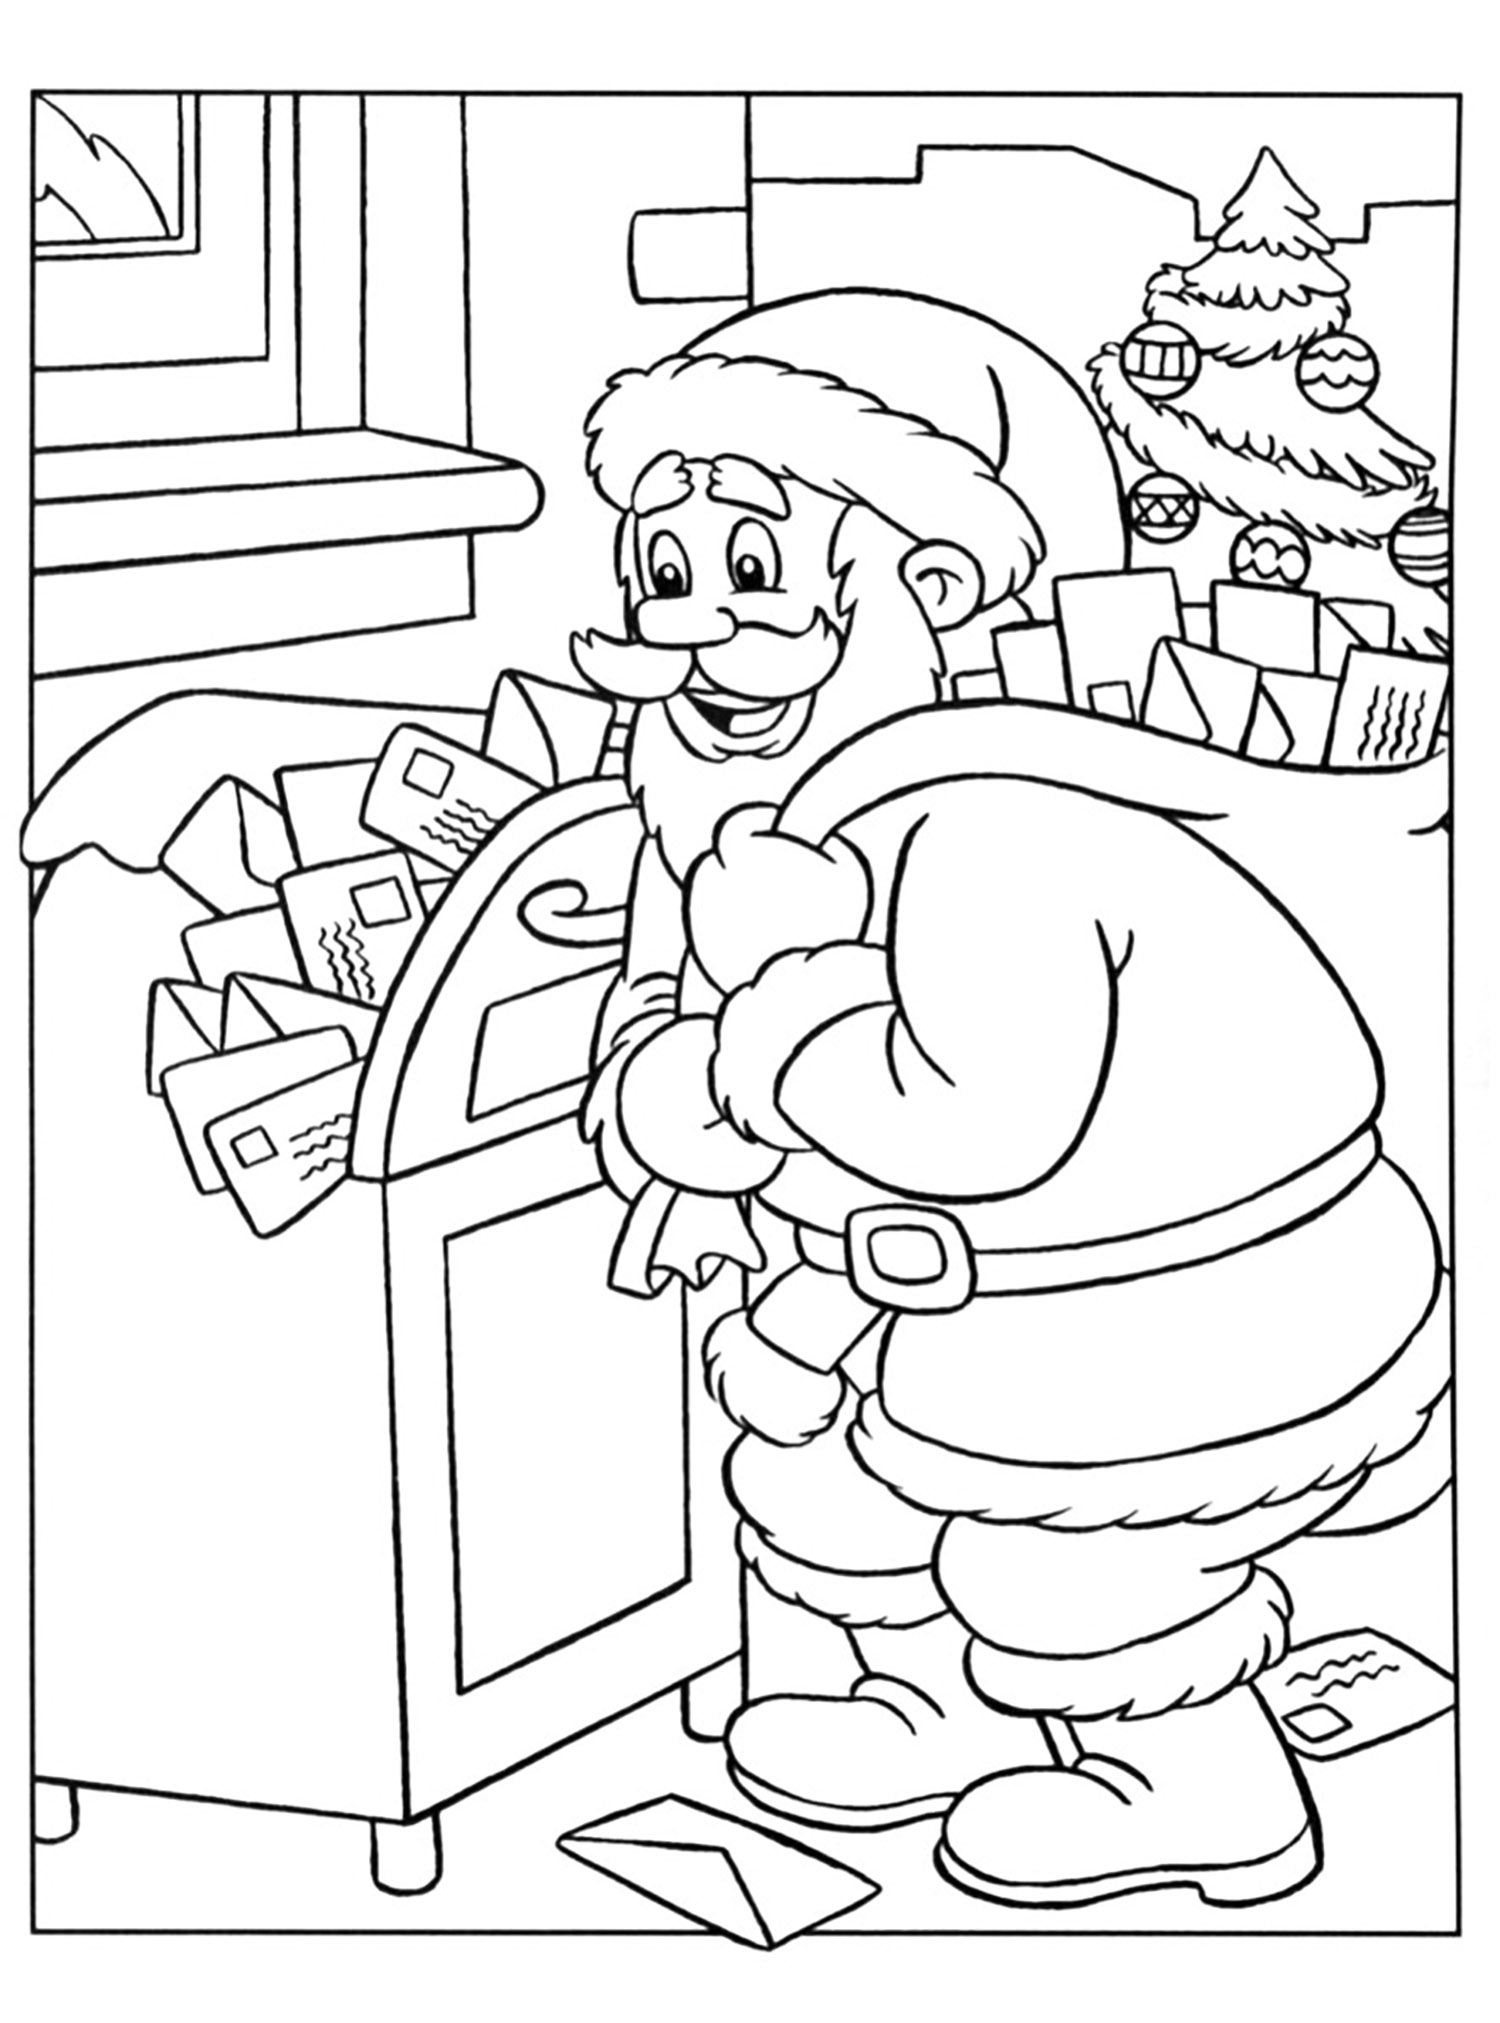 Santa claus and his letters - Christmas Coloring pages for kids to print &  color